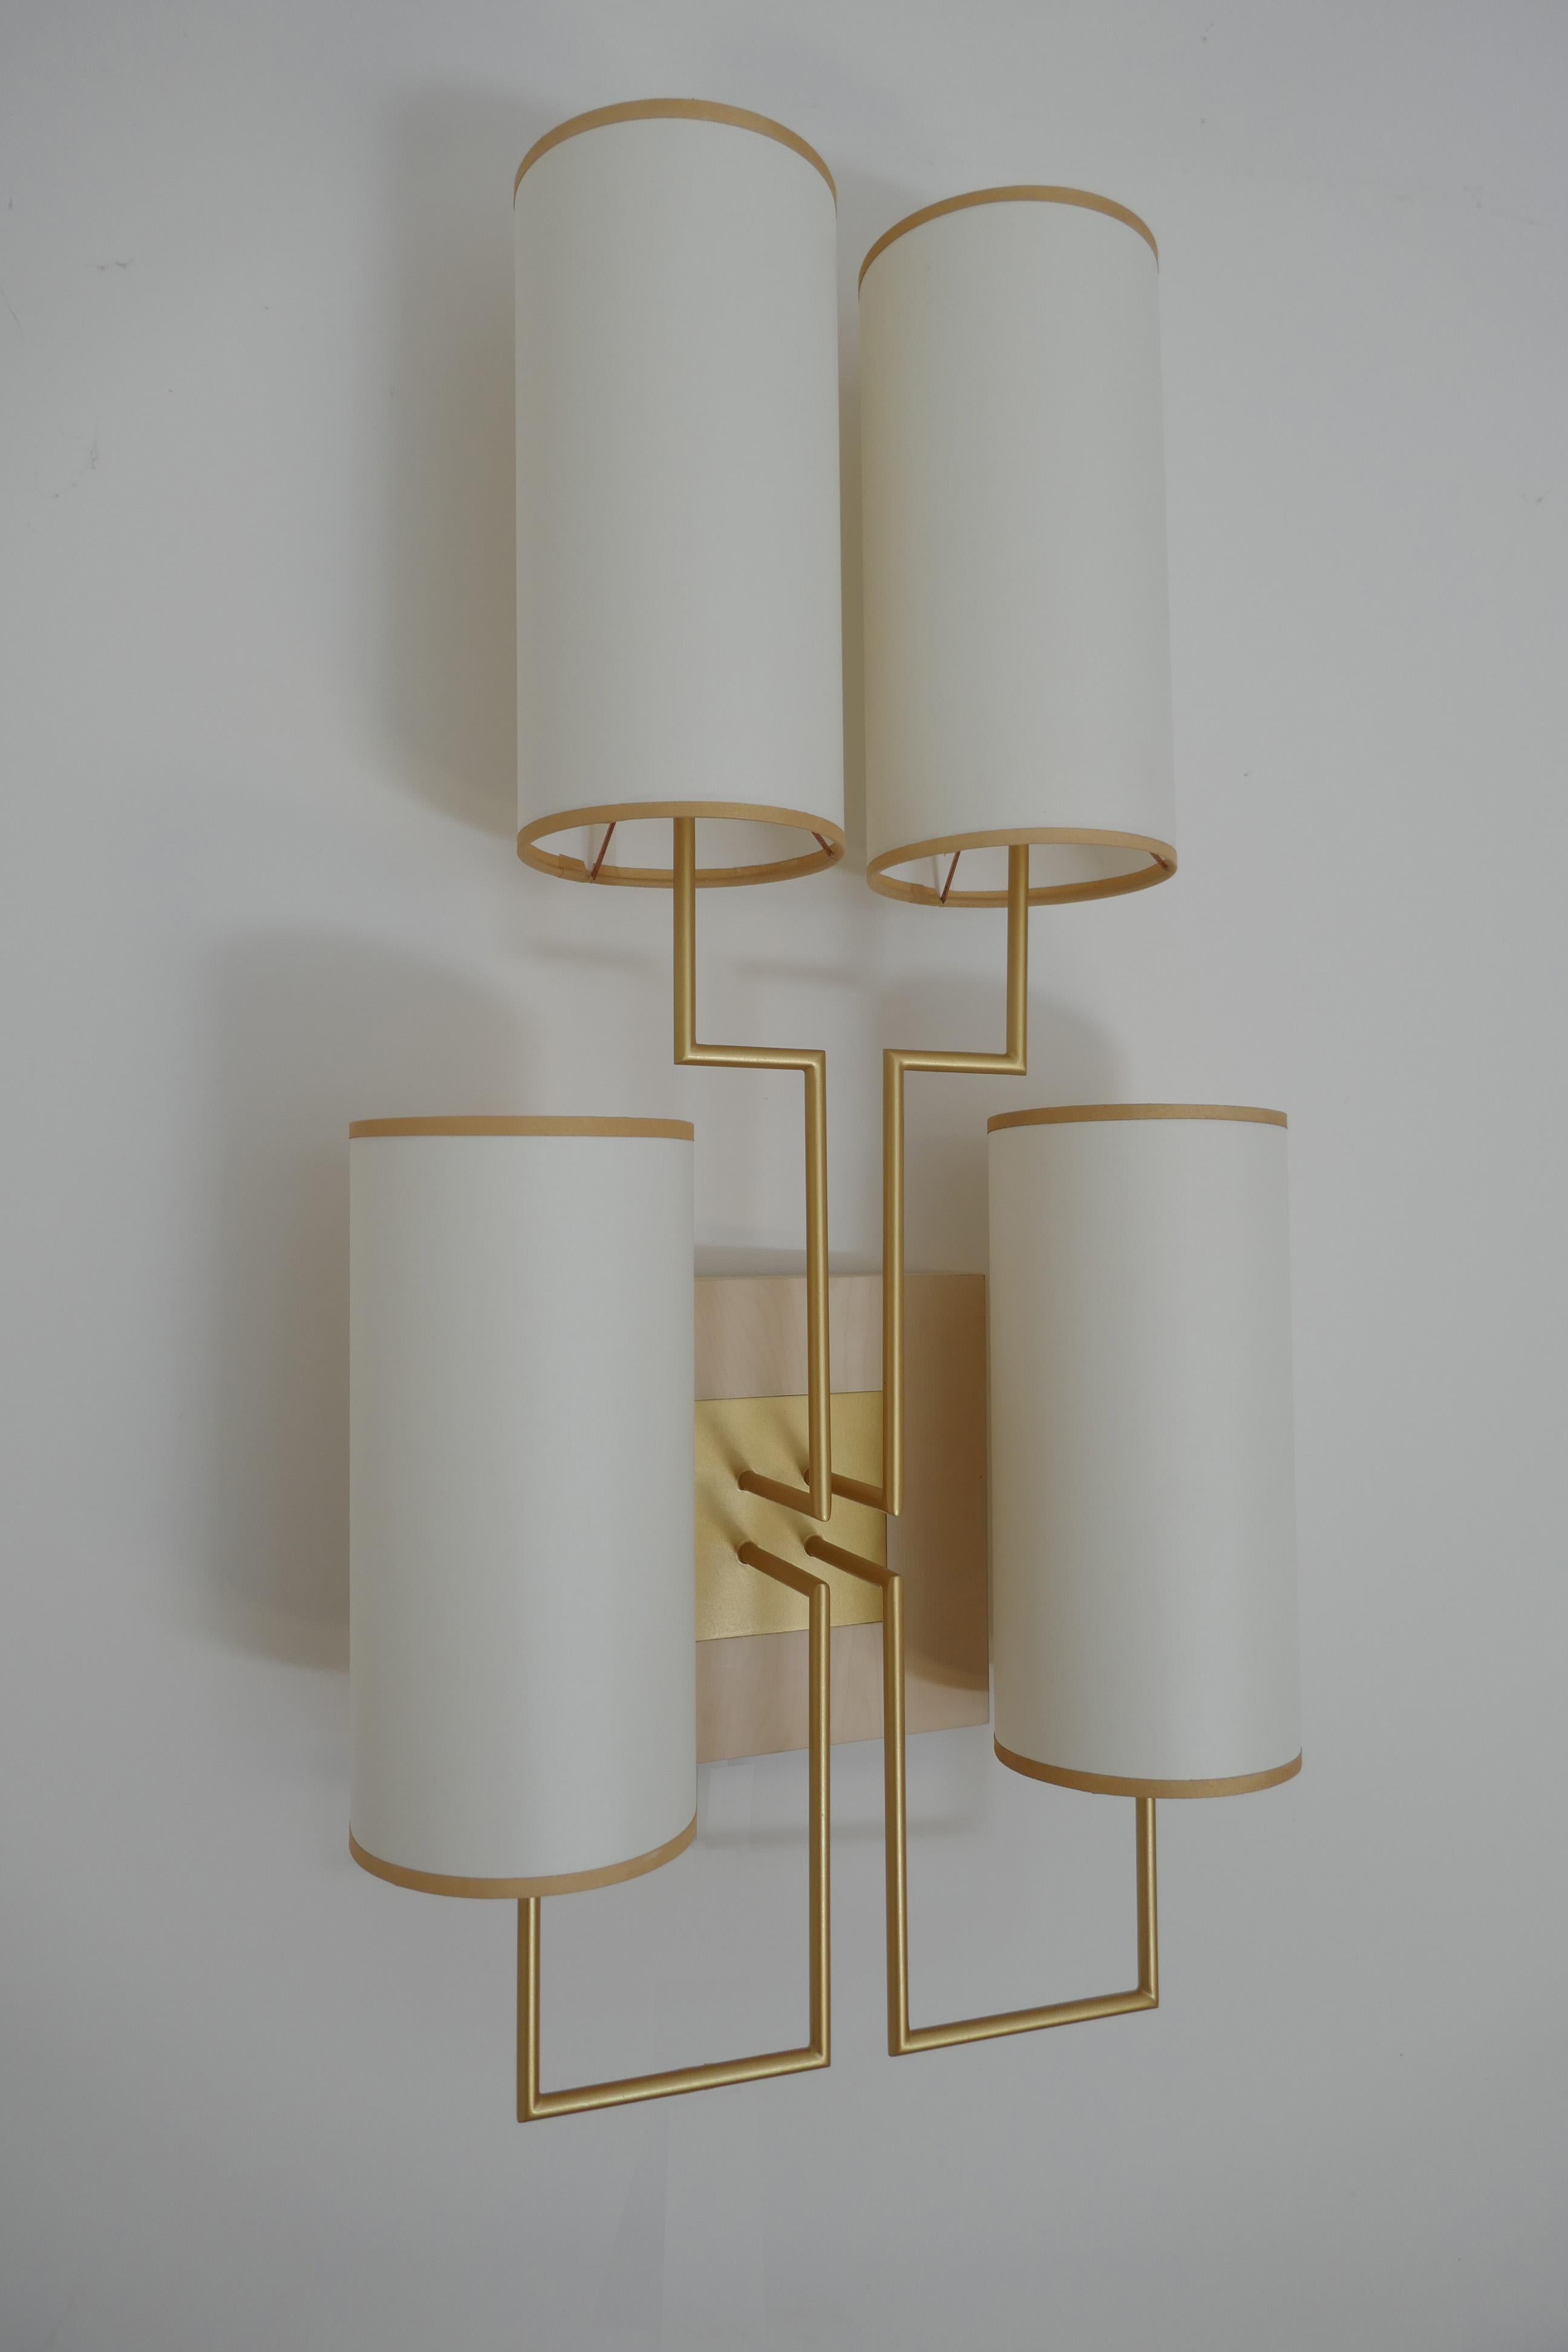 Contemporary Wall Lamp Sconce in Gold Patina and White Lamp Shades For Sale